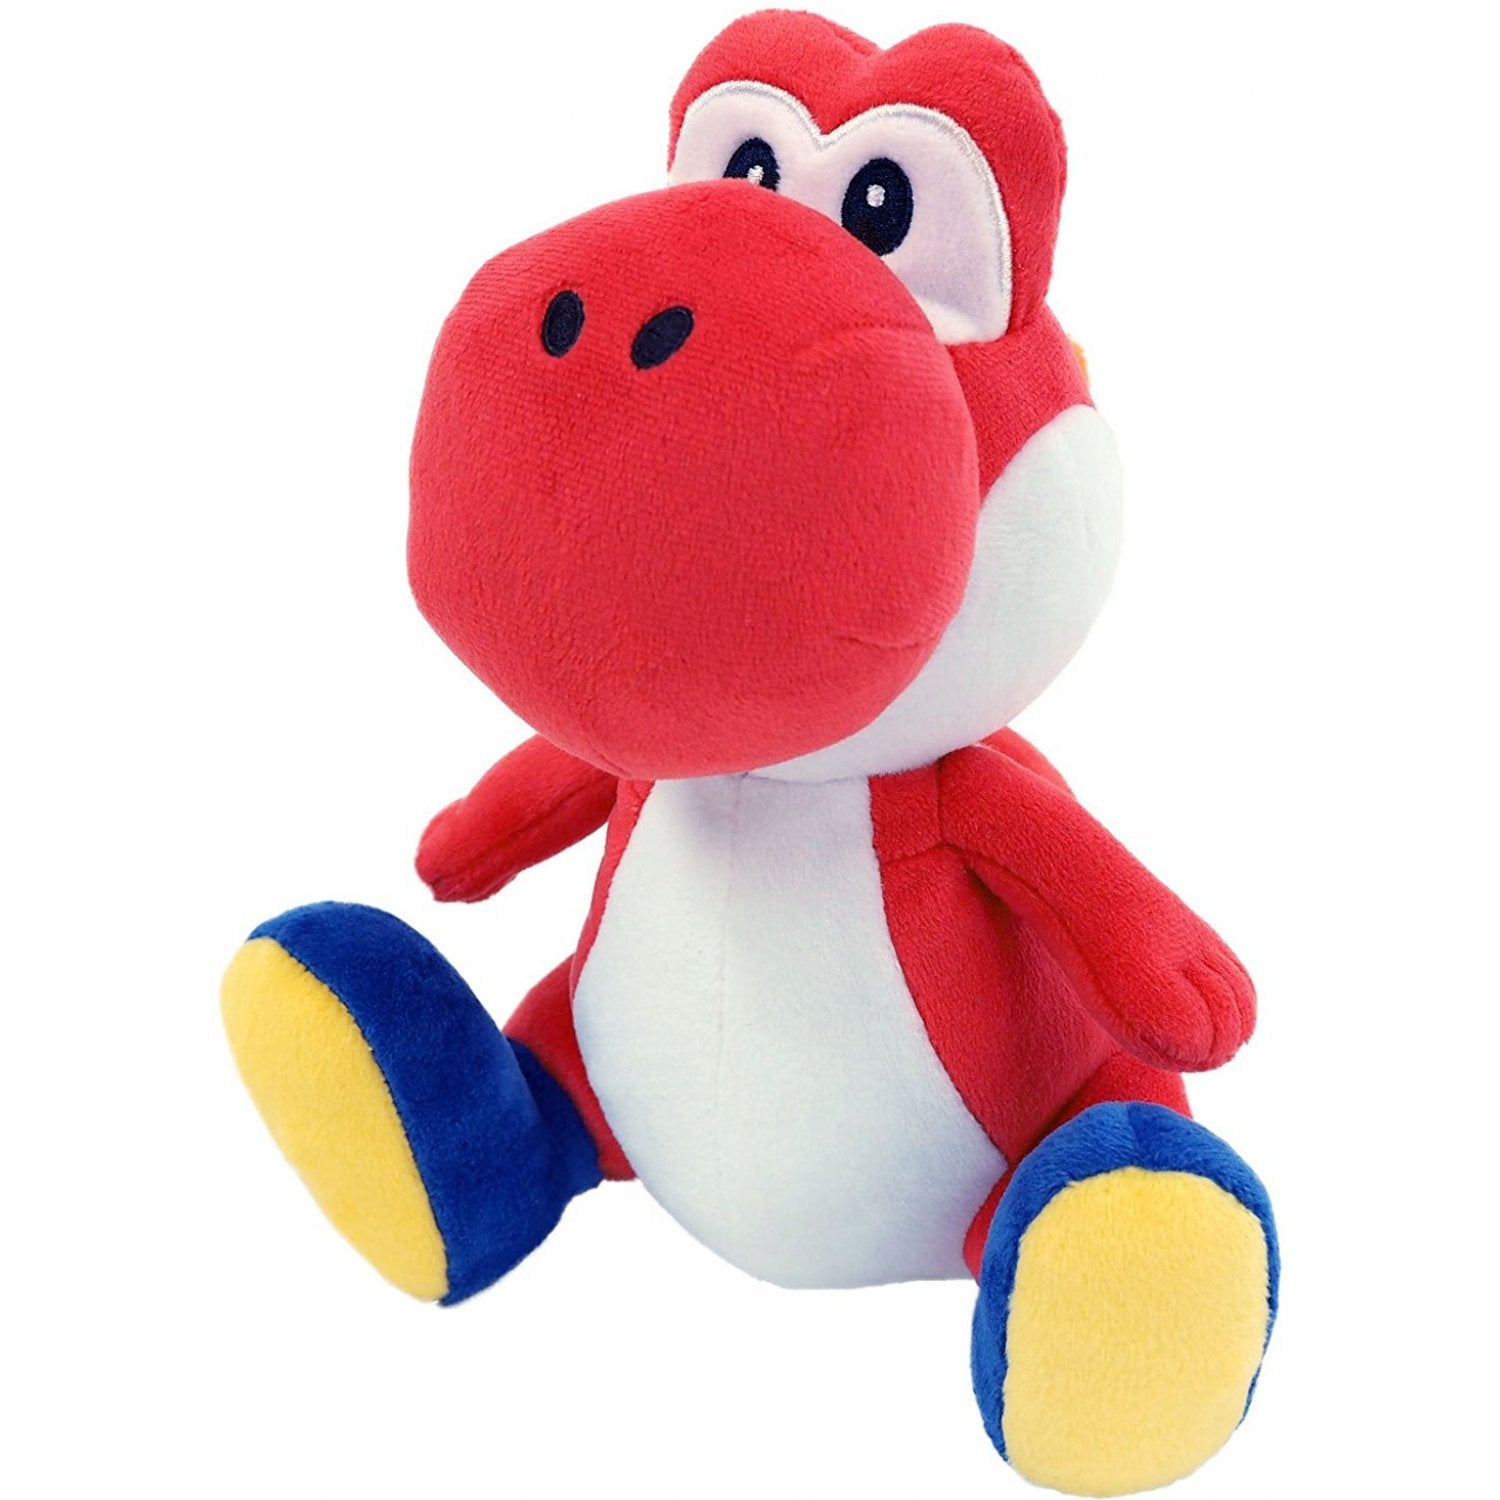 A red yoshi plushie with blue shoes